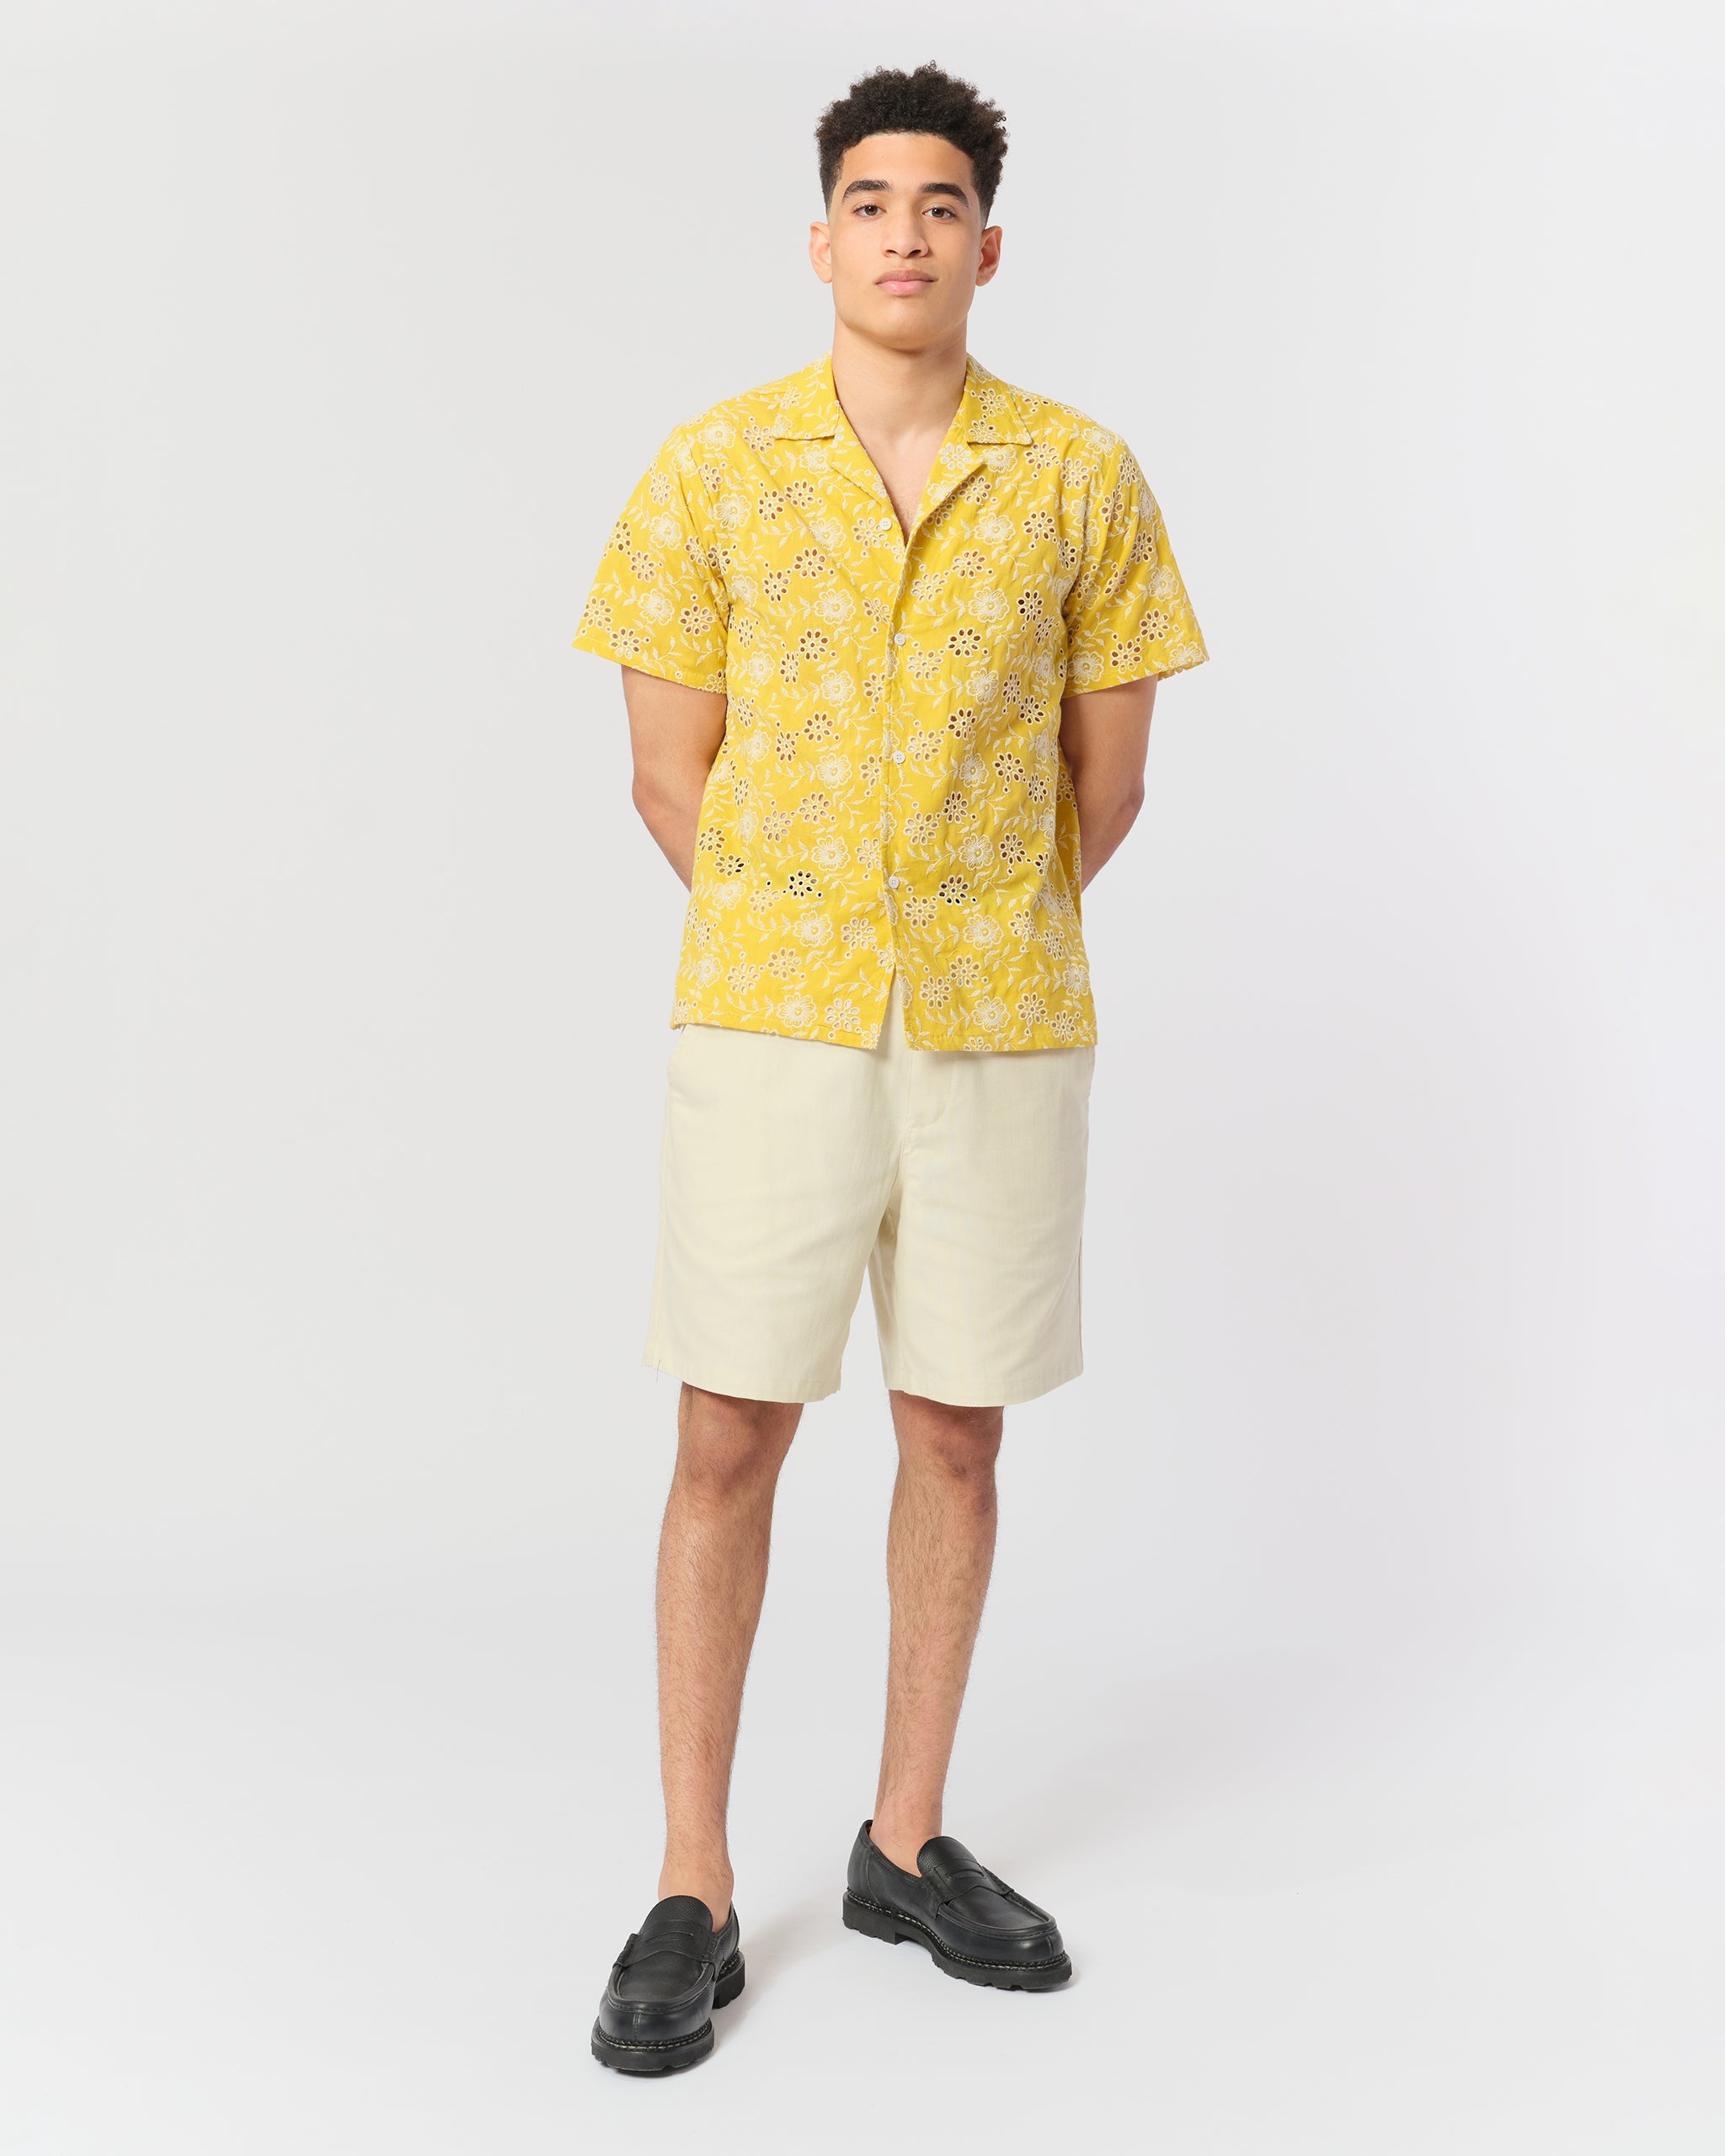 model wearing Yellow camp shirt with an embroidered floral pattern